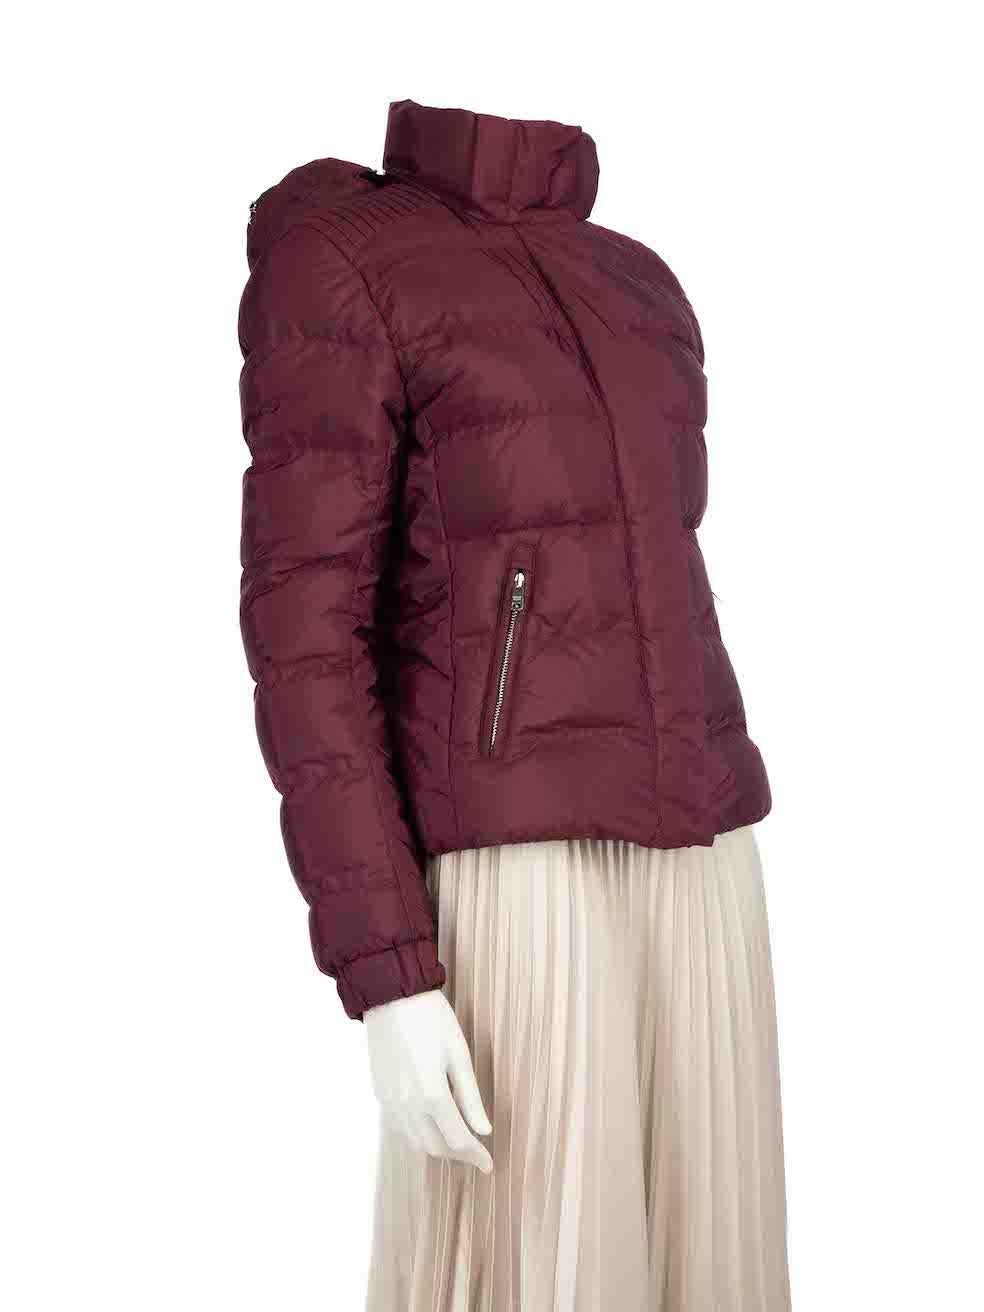 CONDITION is Very good. Minimal wear to coat is evident. Some discolouration around the inside neck on this used Prada designer resale item.
 
 
 
 Details
 
 
 Purple
 
 Synthetic
 
 Down coat
 
 Goose down and feather padding
 
 Zip and snap